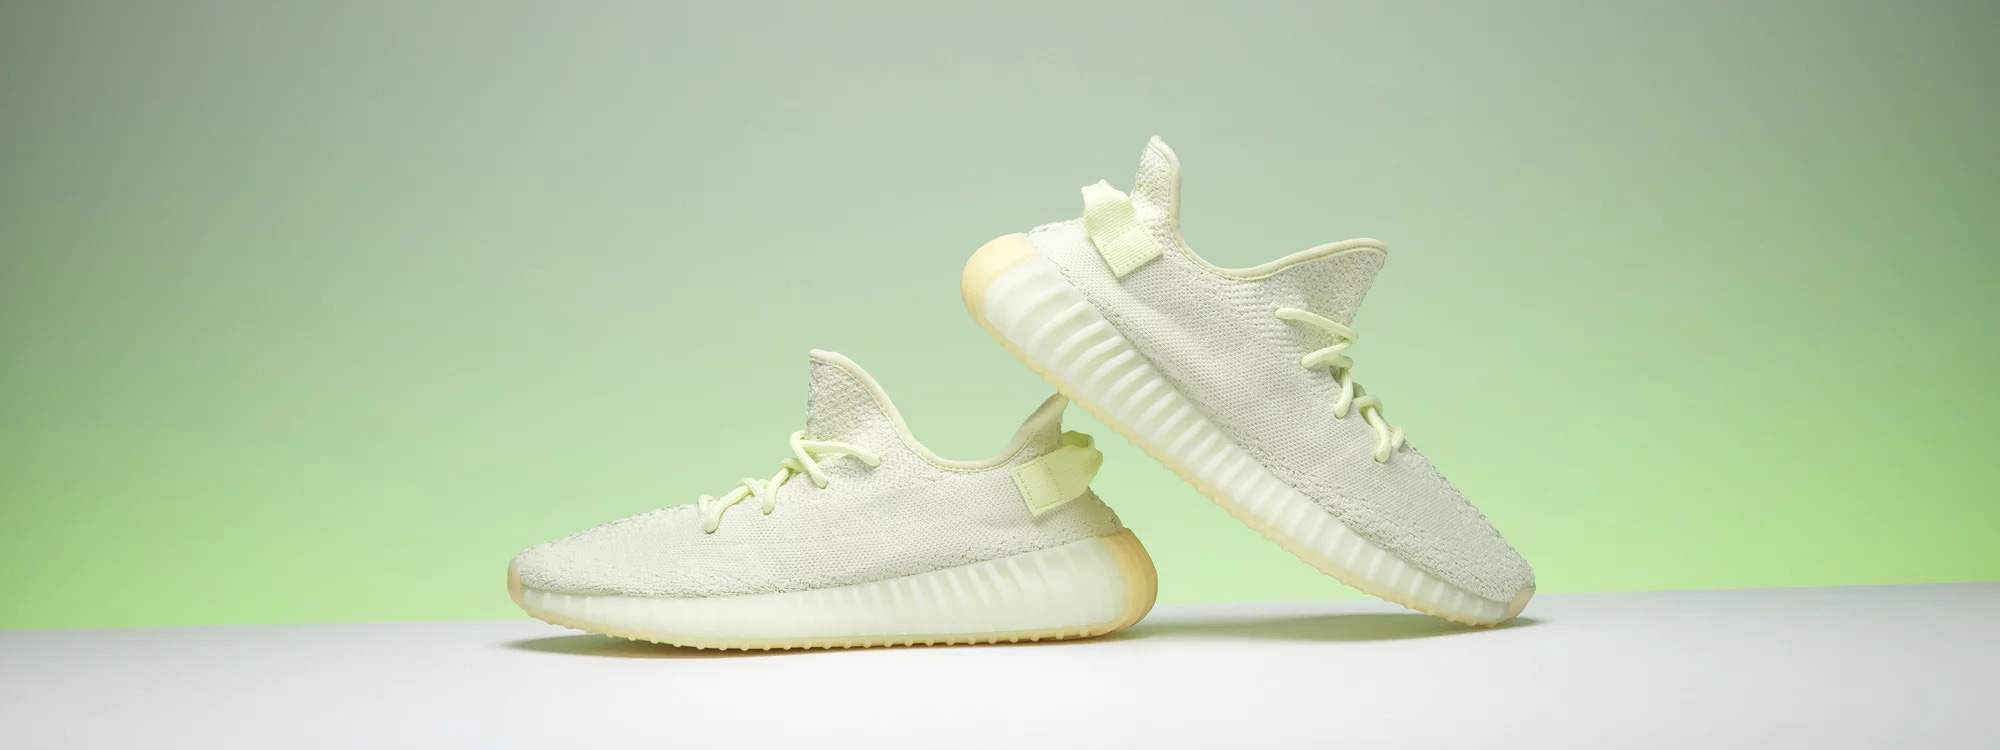 Cheap Adidas Yeezy Boost 350 V2 Butter sneakers